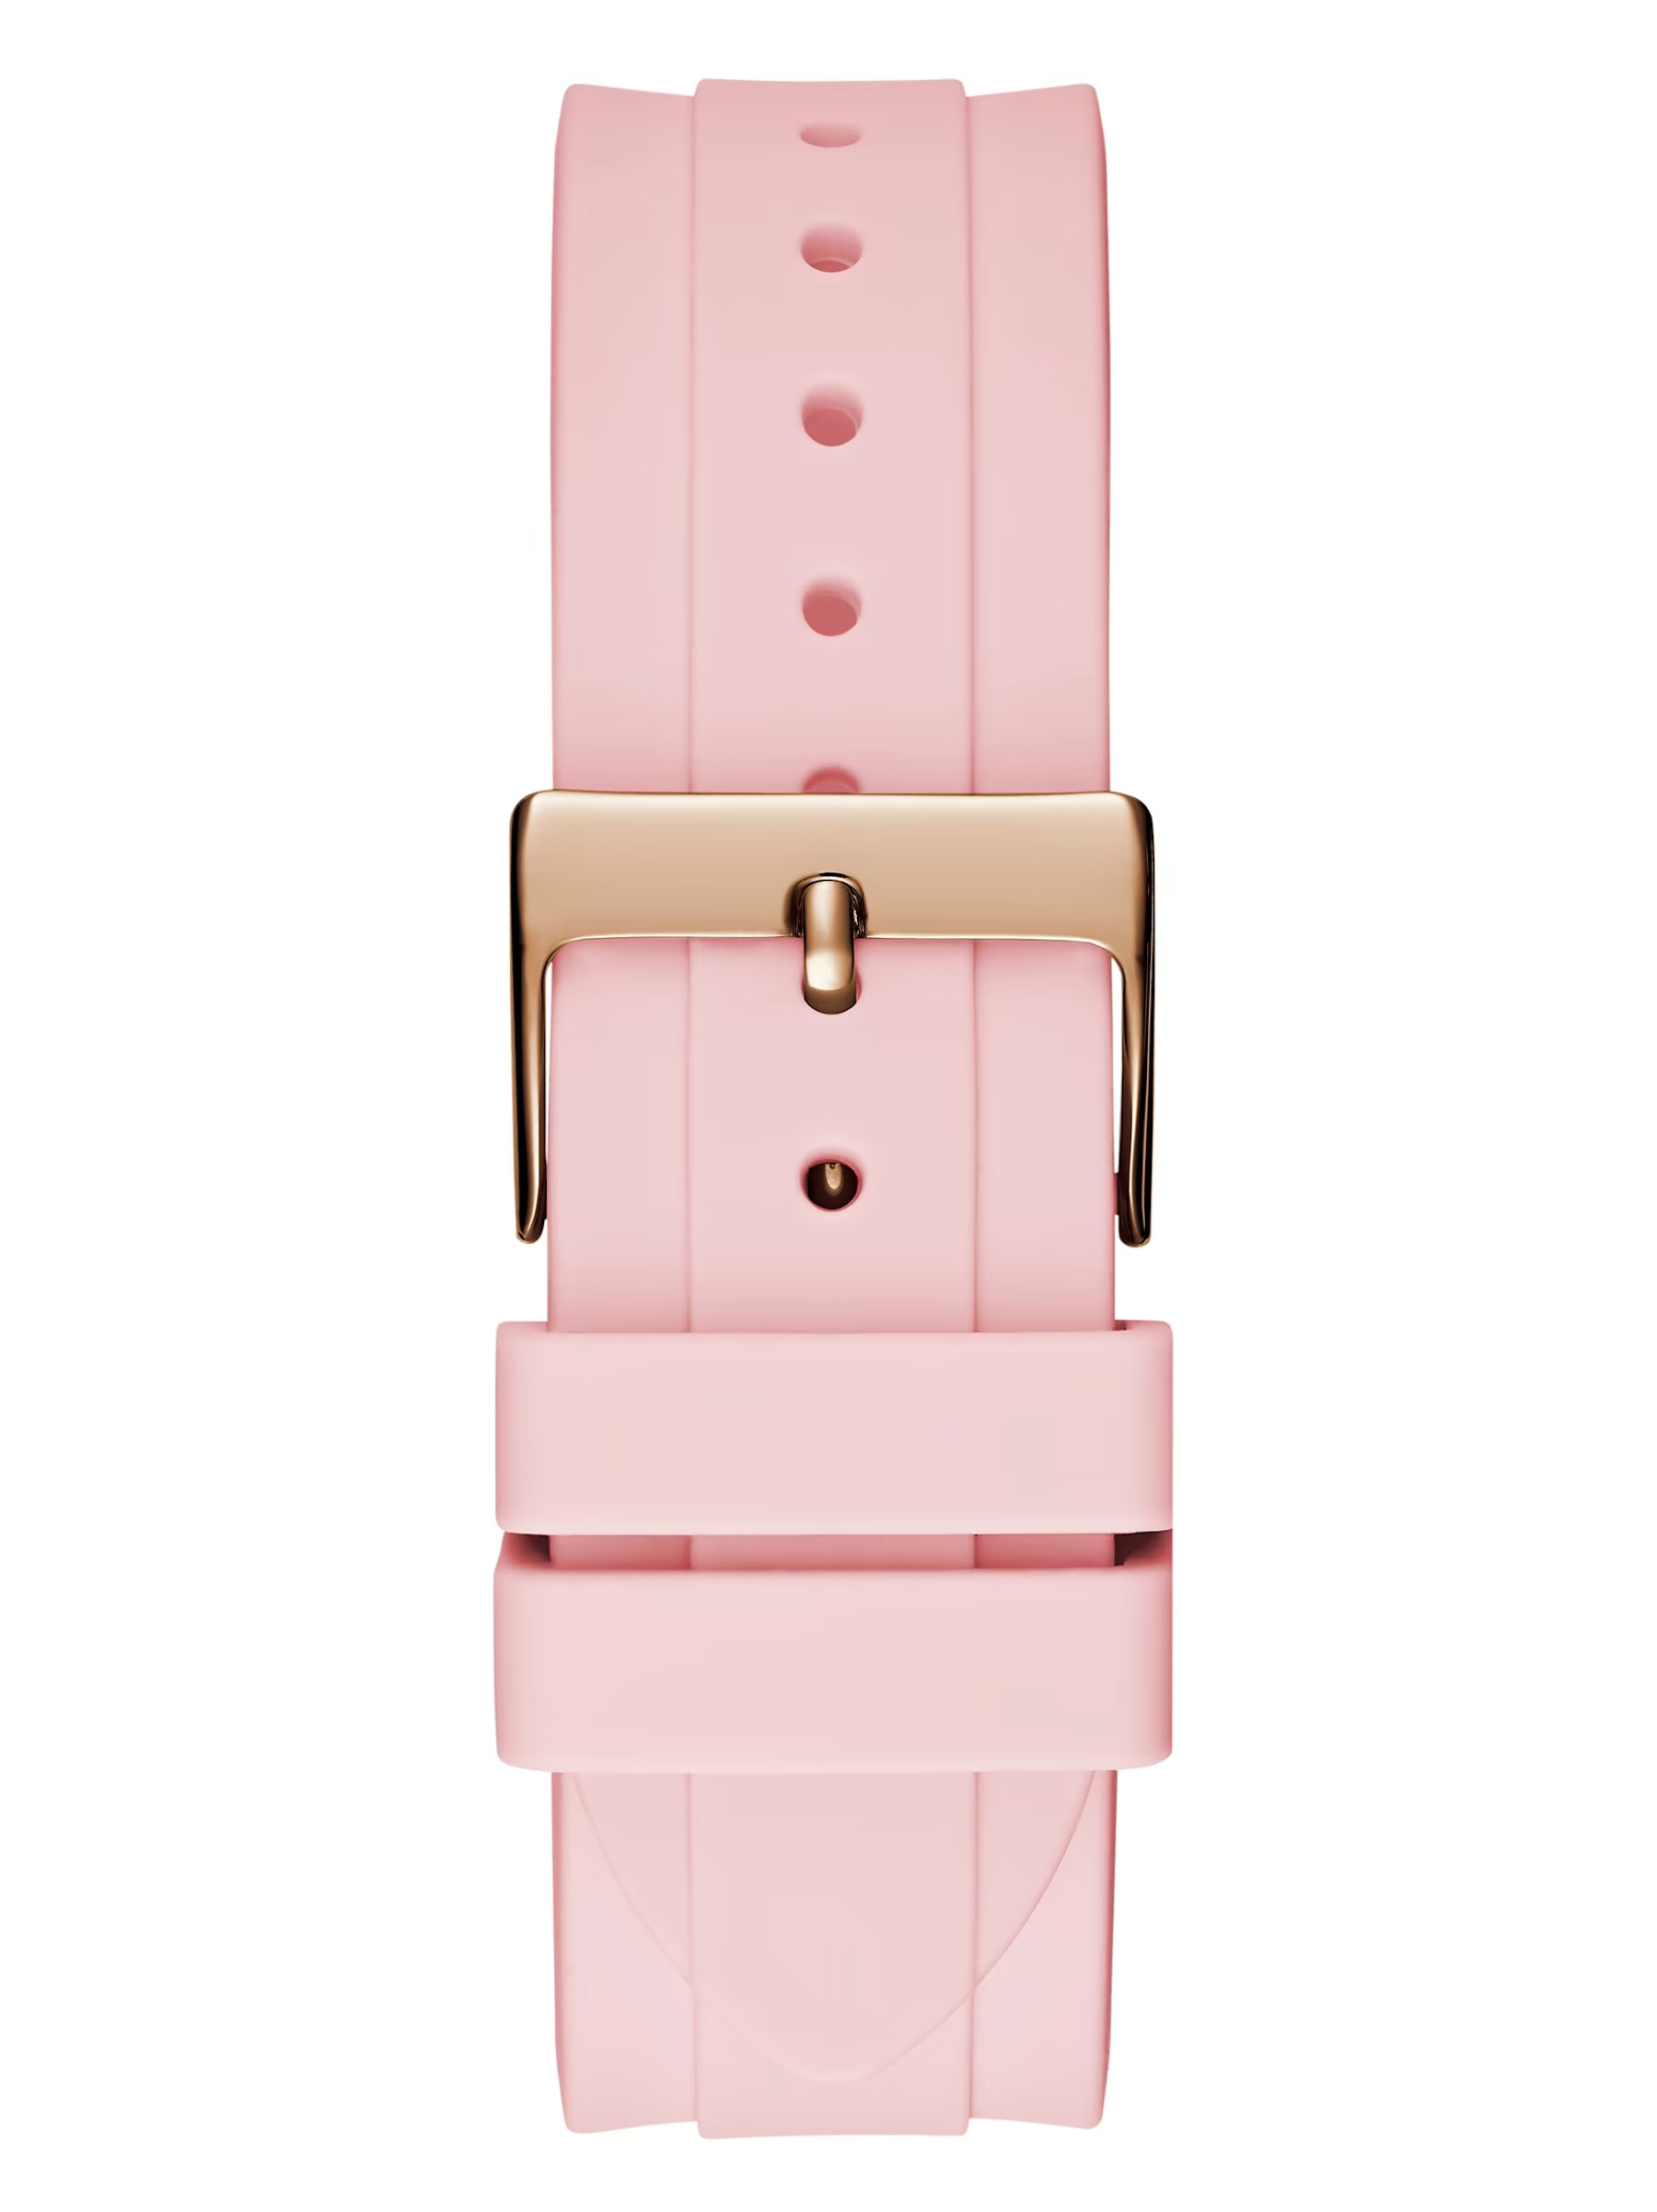 ĐỒNG HỒ NỮ GUESS LADIES SPARKLING PINK LIMITED EDITION WATCH GW0032L4 8